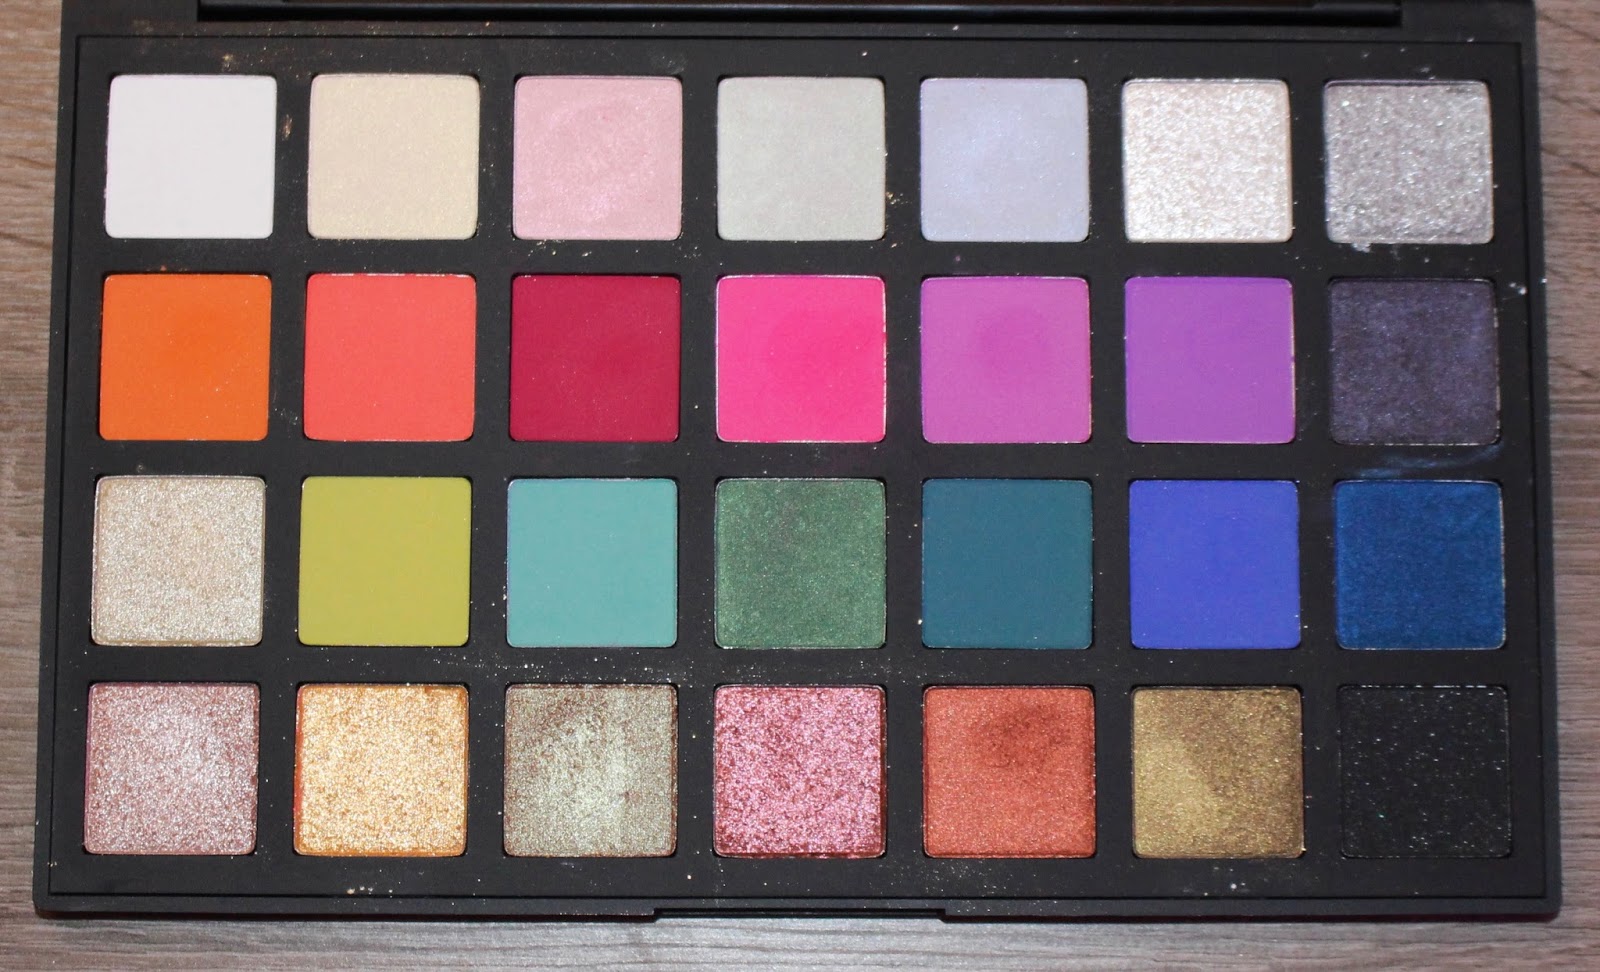 Anti Haul Blog Why I Bought The Sephora Pro Editorial Palette